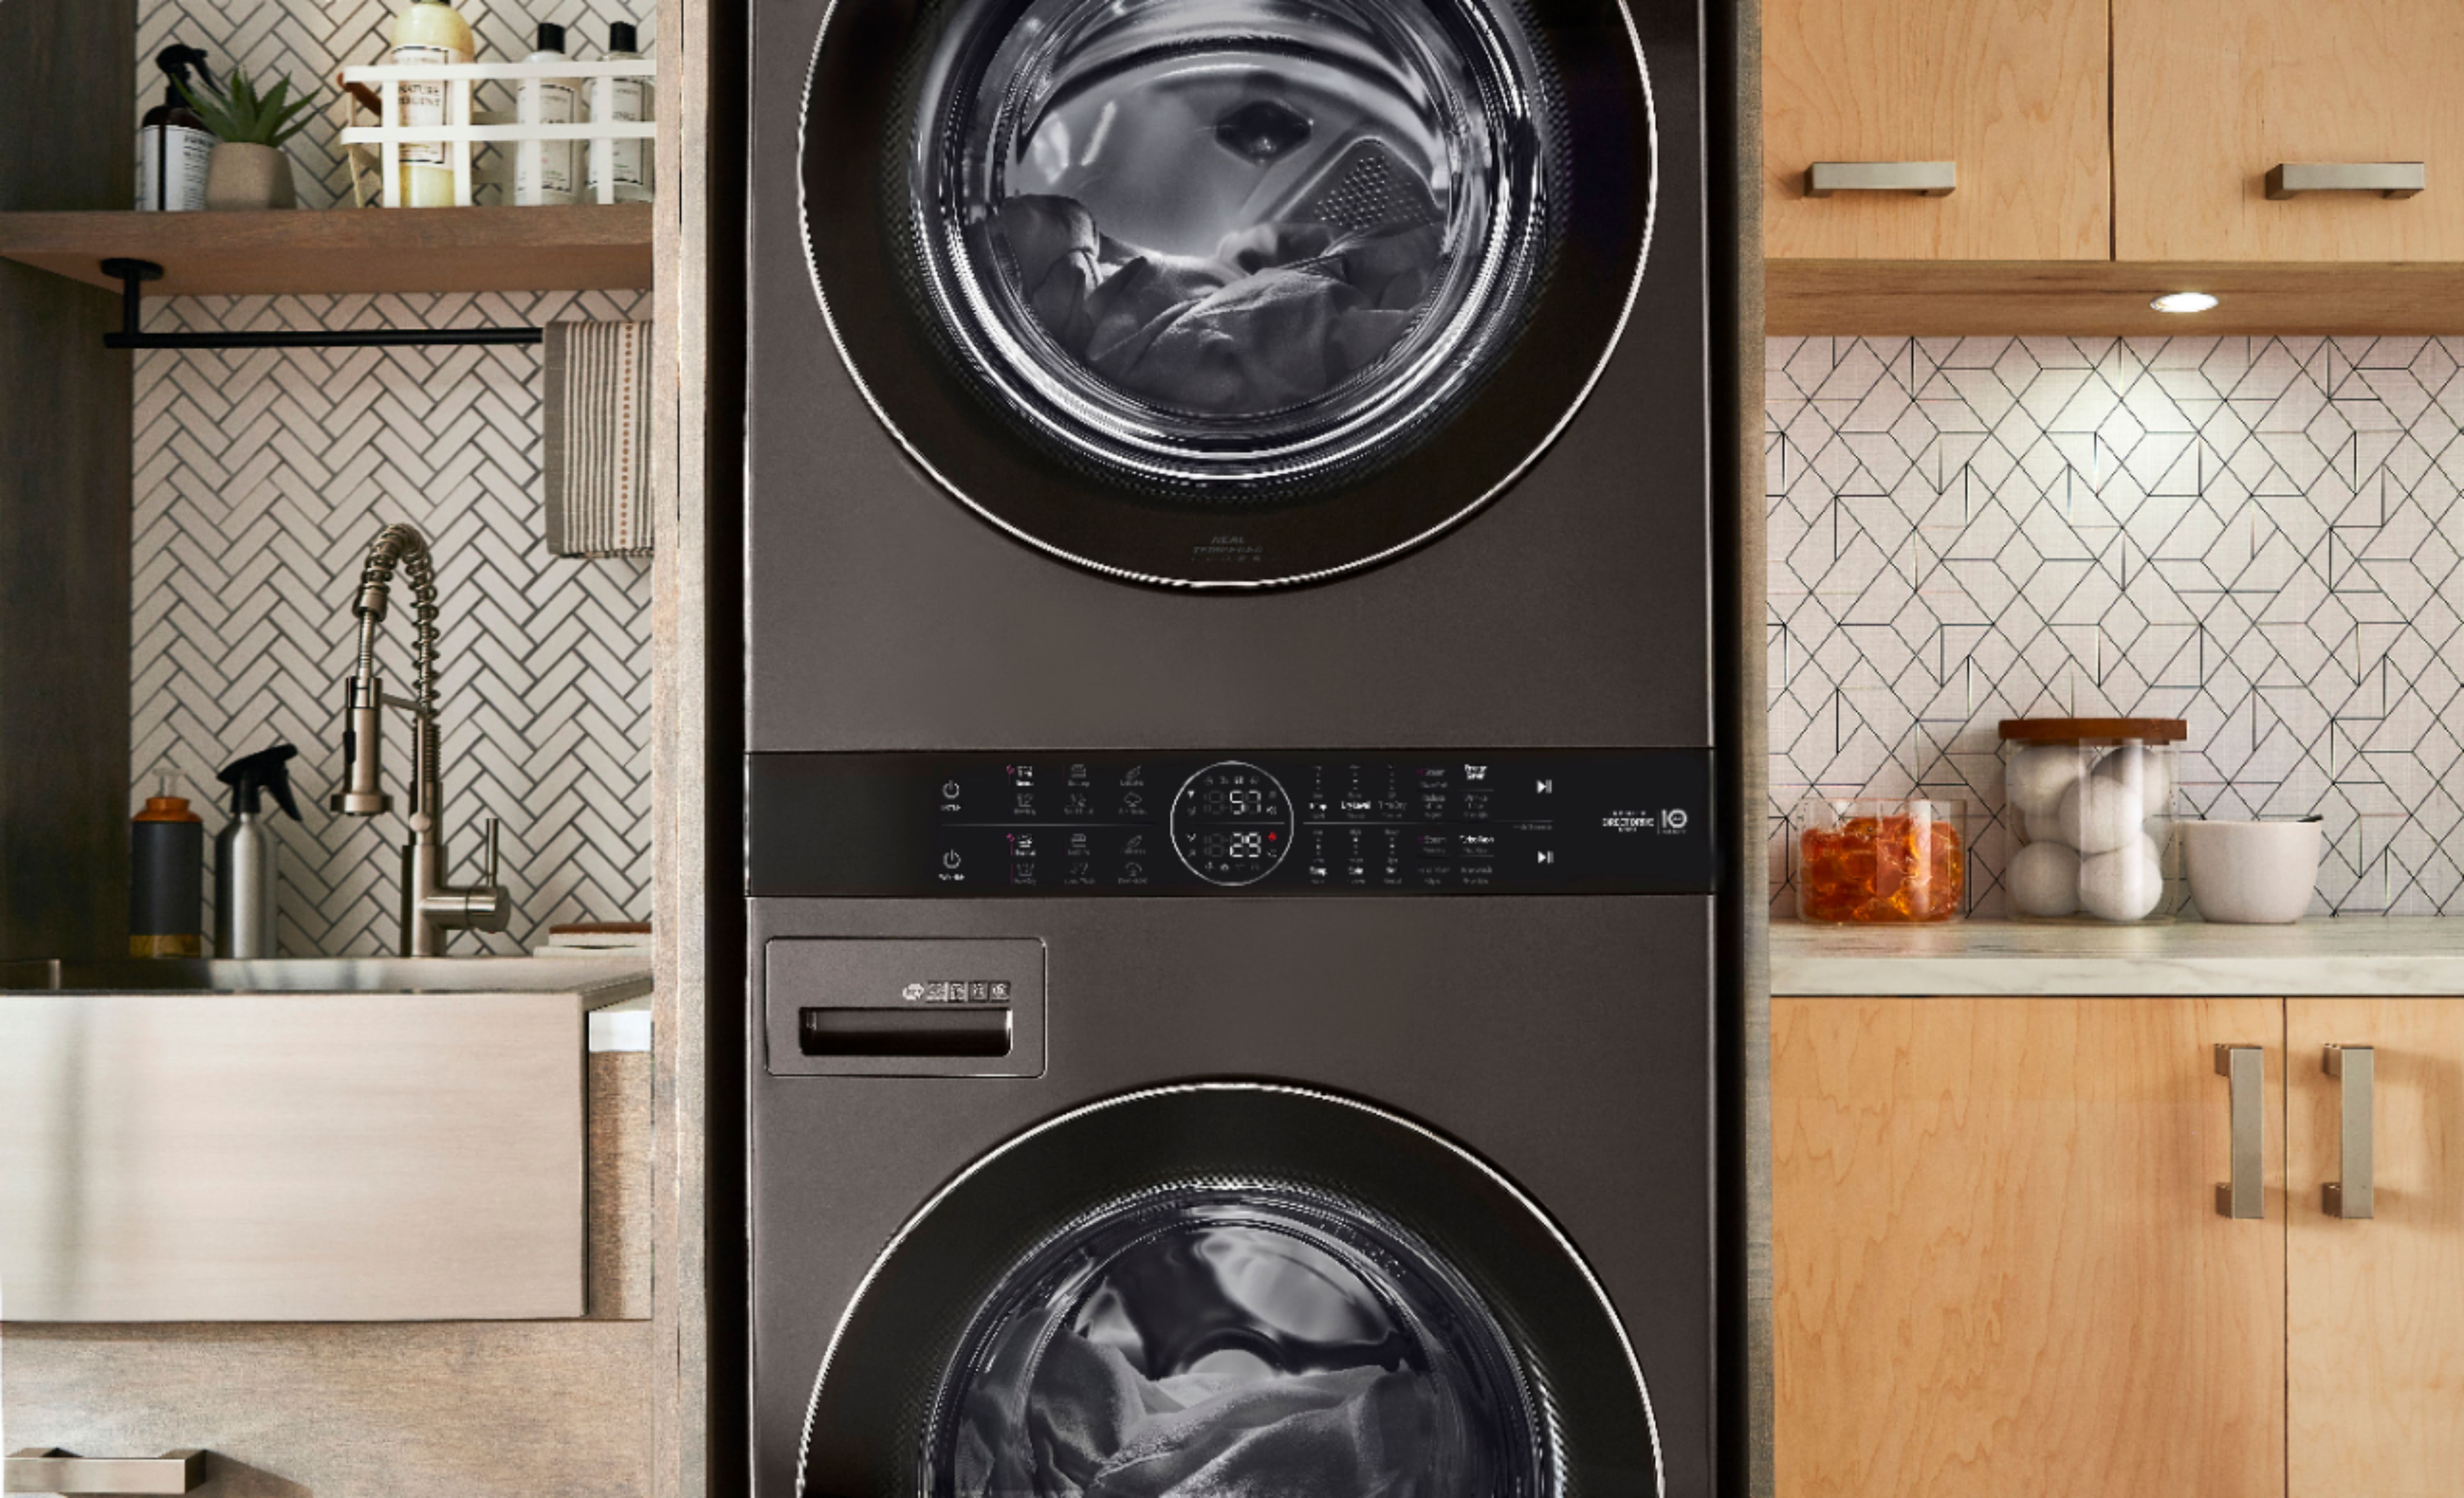 WKEX200HBA Load Front with Ft. - Cu. Steam Smart Cu. Intelligence and Black Electric WashTower LG and Steel HE Dryer Ft. Washer Best 7.4 Built-In Buy 4.5